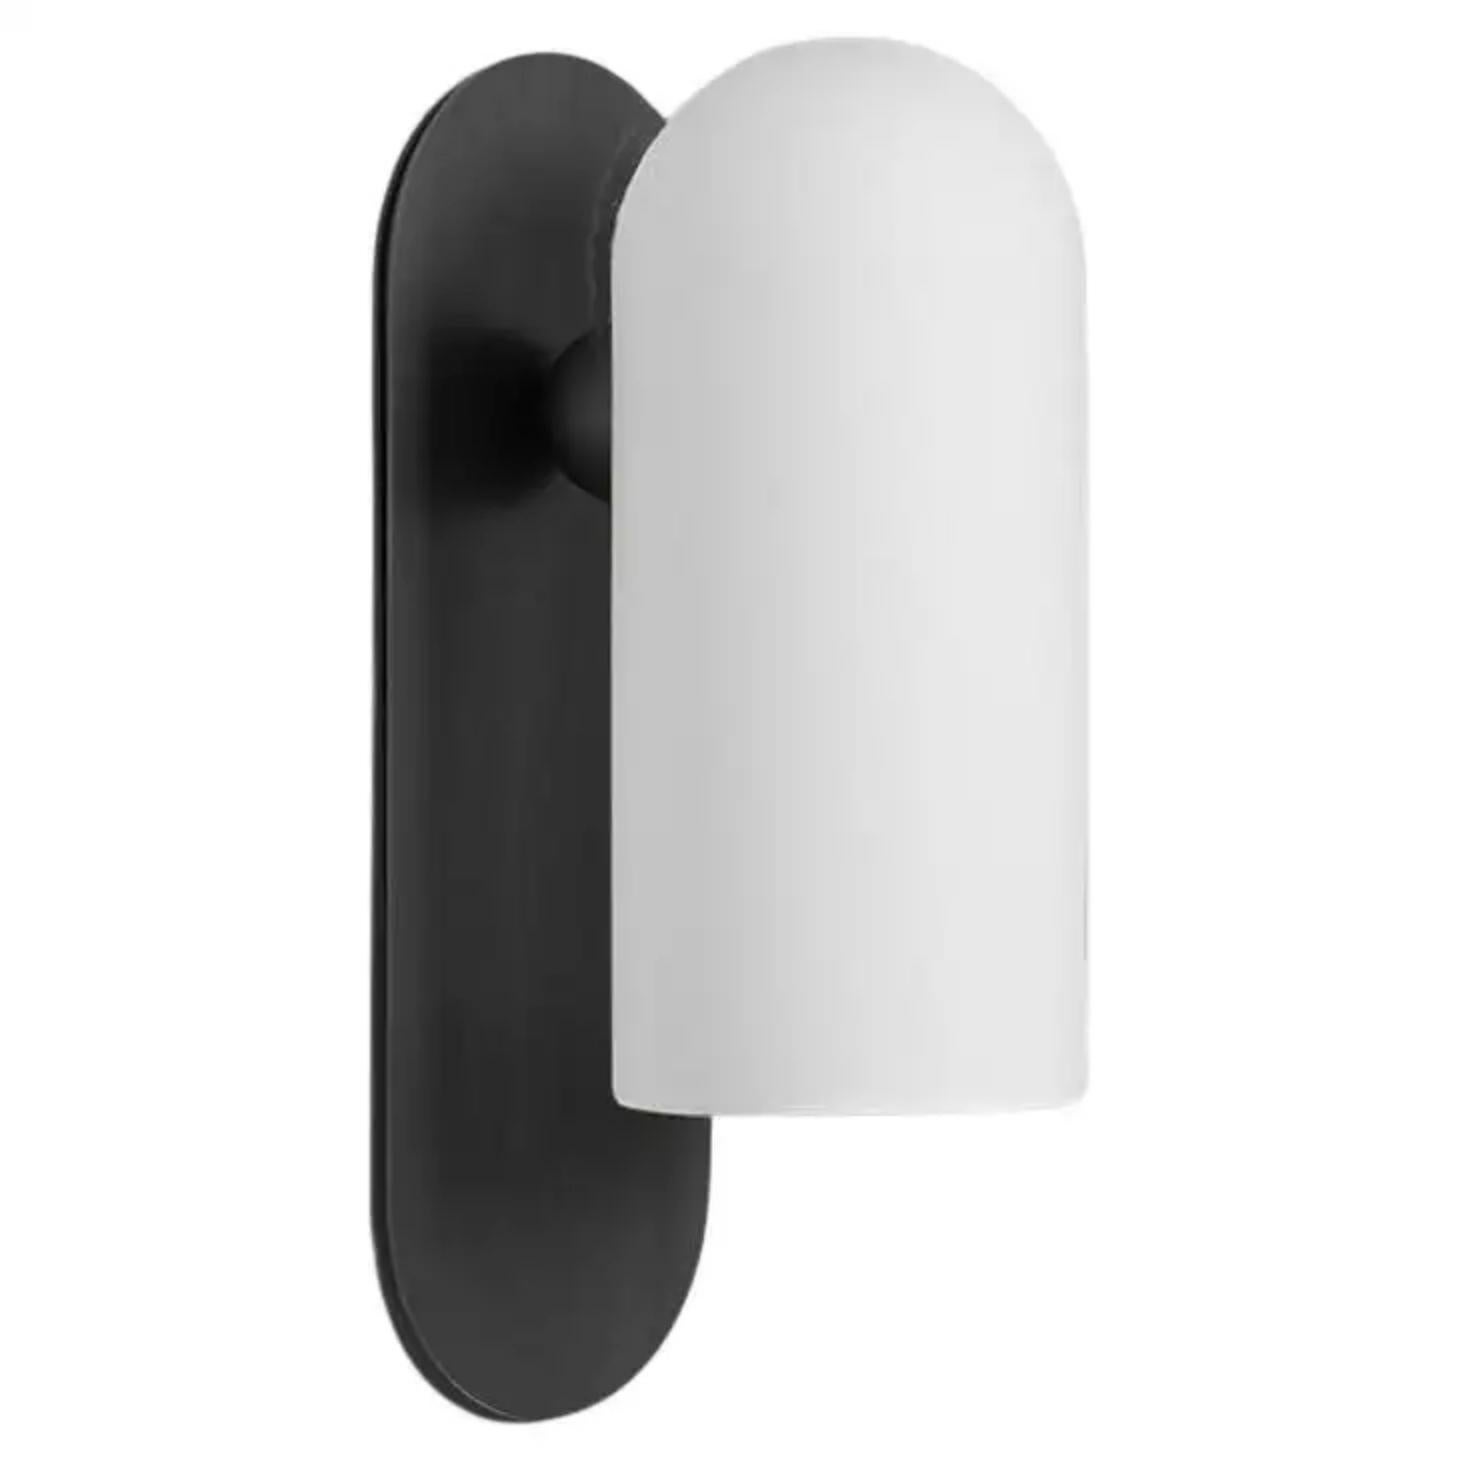 Black medium sconce by Schwung.
Dimensions: W 10.5 x D 14 x H 30.5 cm.
Materials: Black gunmetal, frosted glass.

Finishes available: Black gunmetal, polished nickel, brass.


Schwung is a German word, and loosely defined, means energy or momentumm